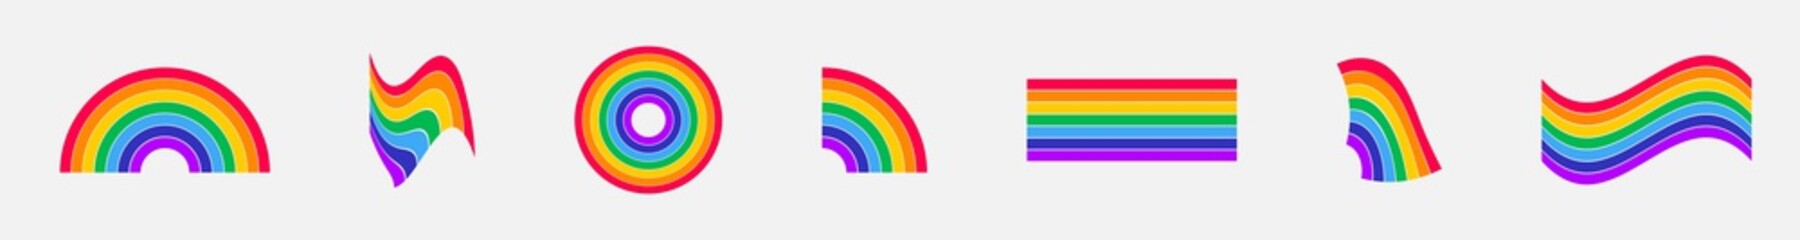 Rainbow collection. Rainbow vector icons different shape, isolated. Vector illustration